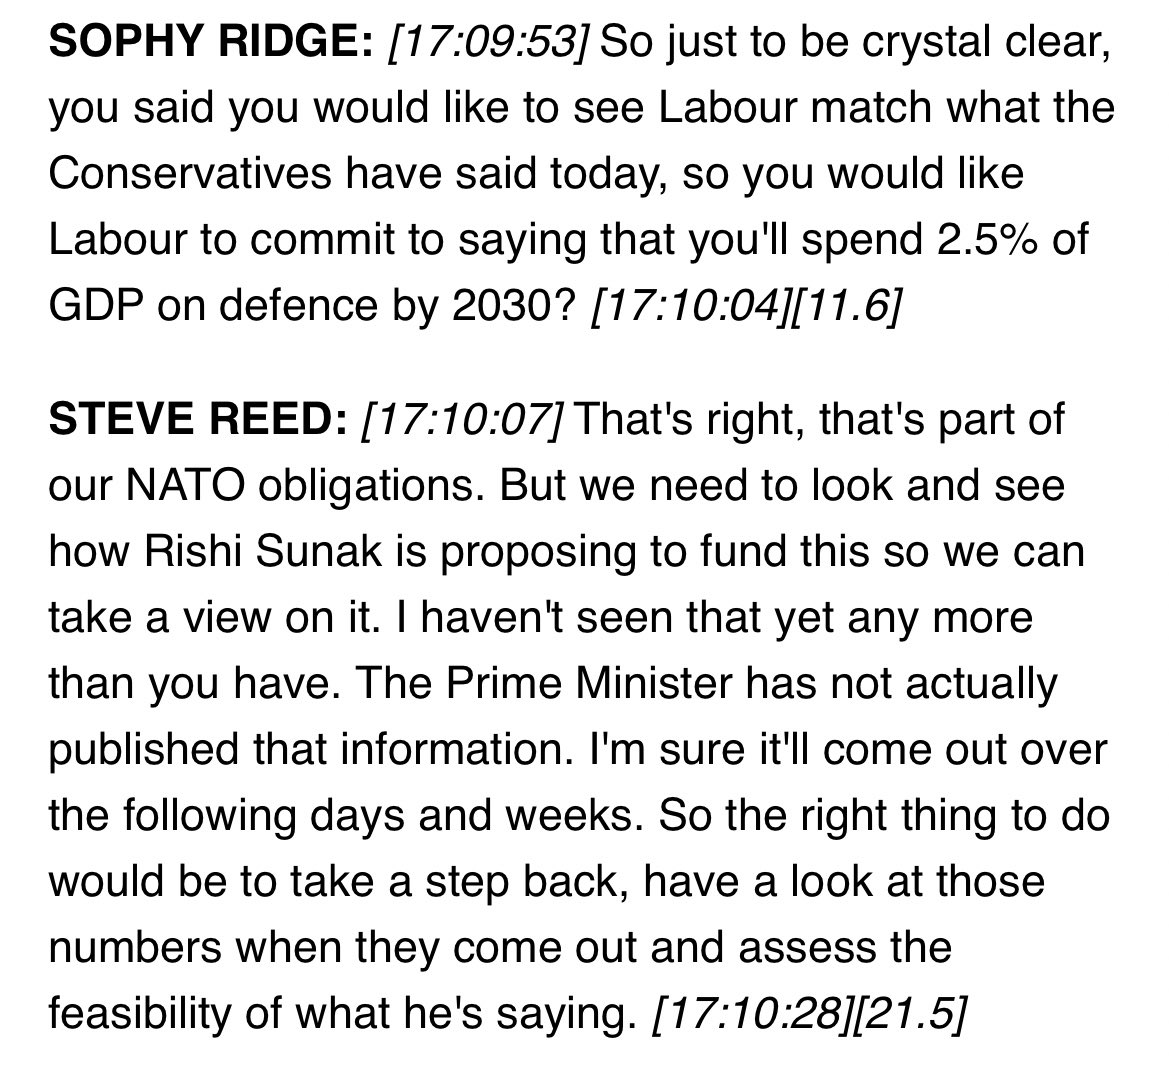 Labour’s Steve Reed tells me Labour would want to match the Conservative commitment to 2.5% of GDP on defence by 2030 “Just to be crystal clear, you would like Labour to commit to saying that you'll spend 2.5% of GDP on defence by 2030?” “That's right” Full interview 7pm